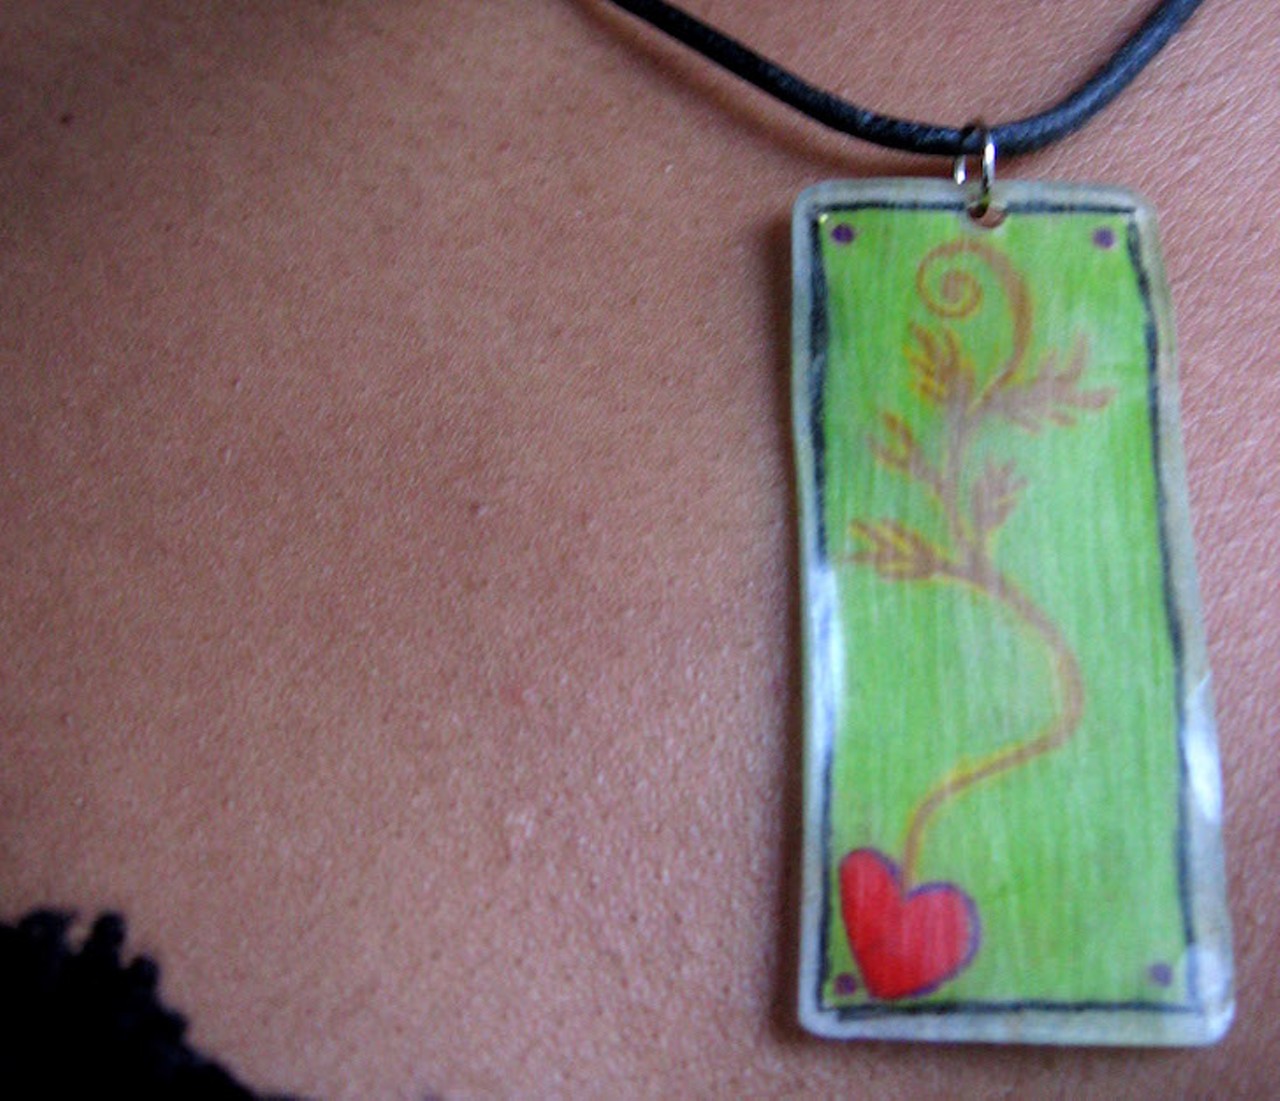 Make Shrinky Dink jewelry at the Gulfport Public Library
Jan. 9: 1 p.m. 
Photo via bandita, Flickr/CC2.0